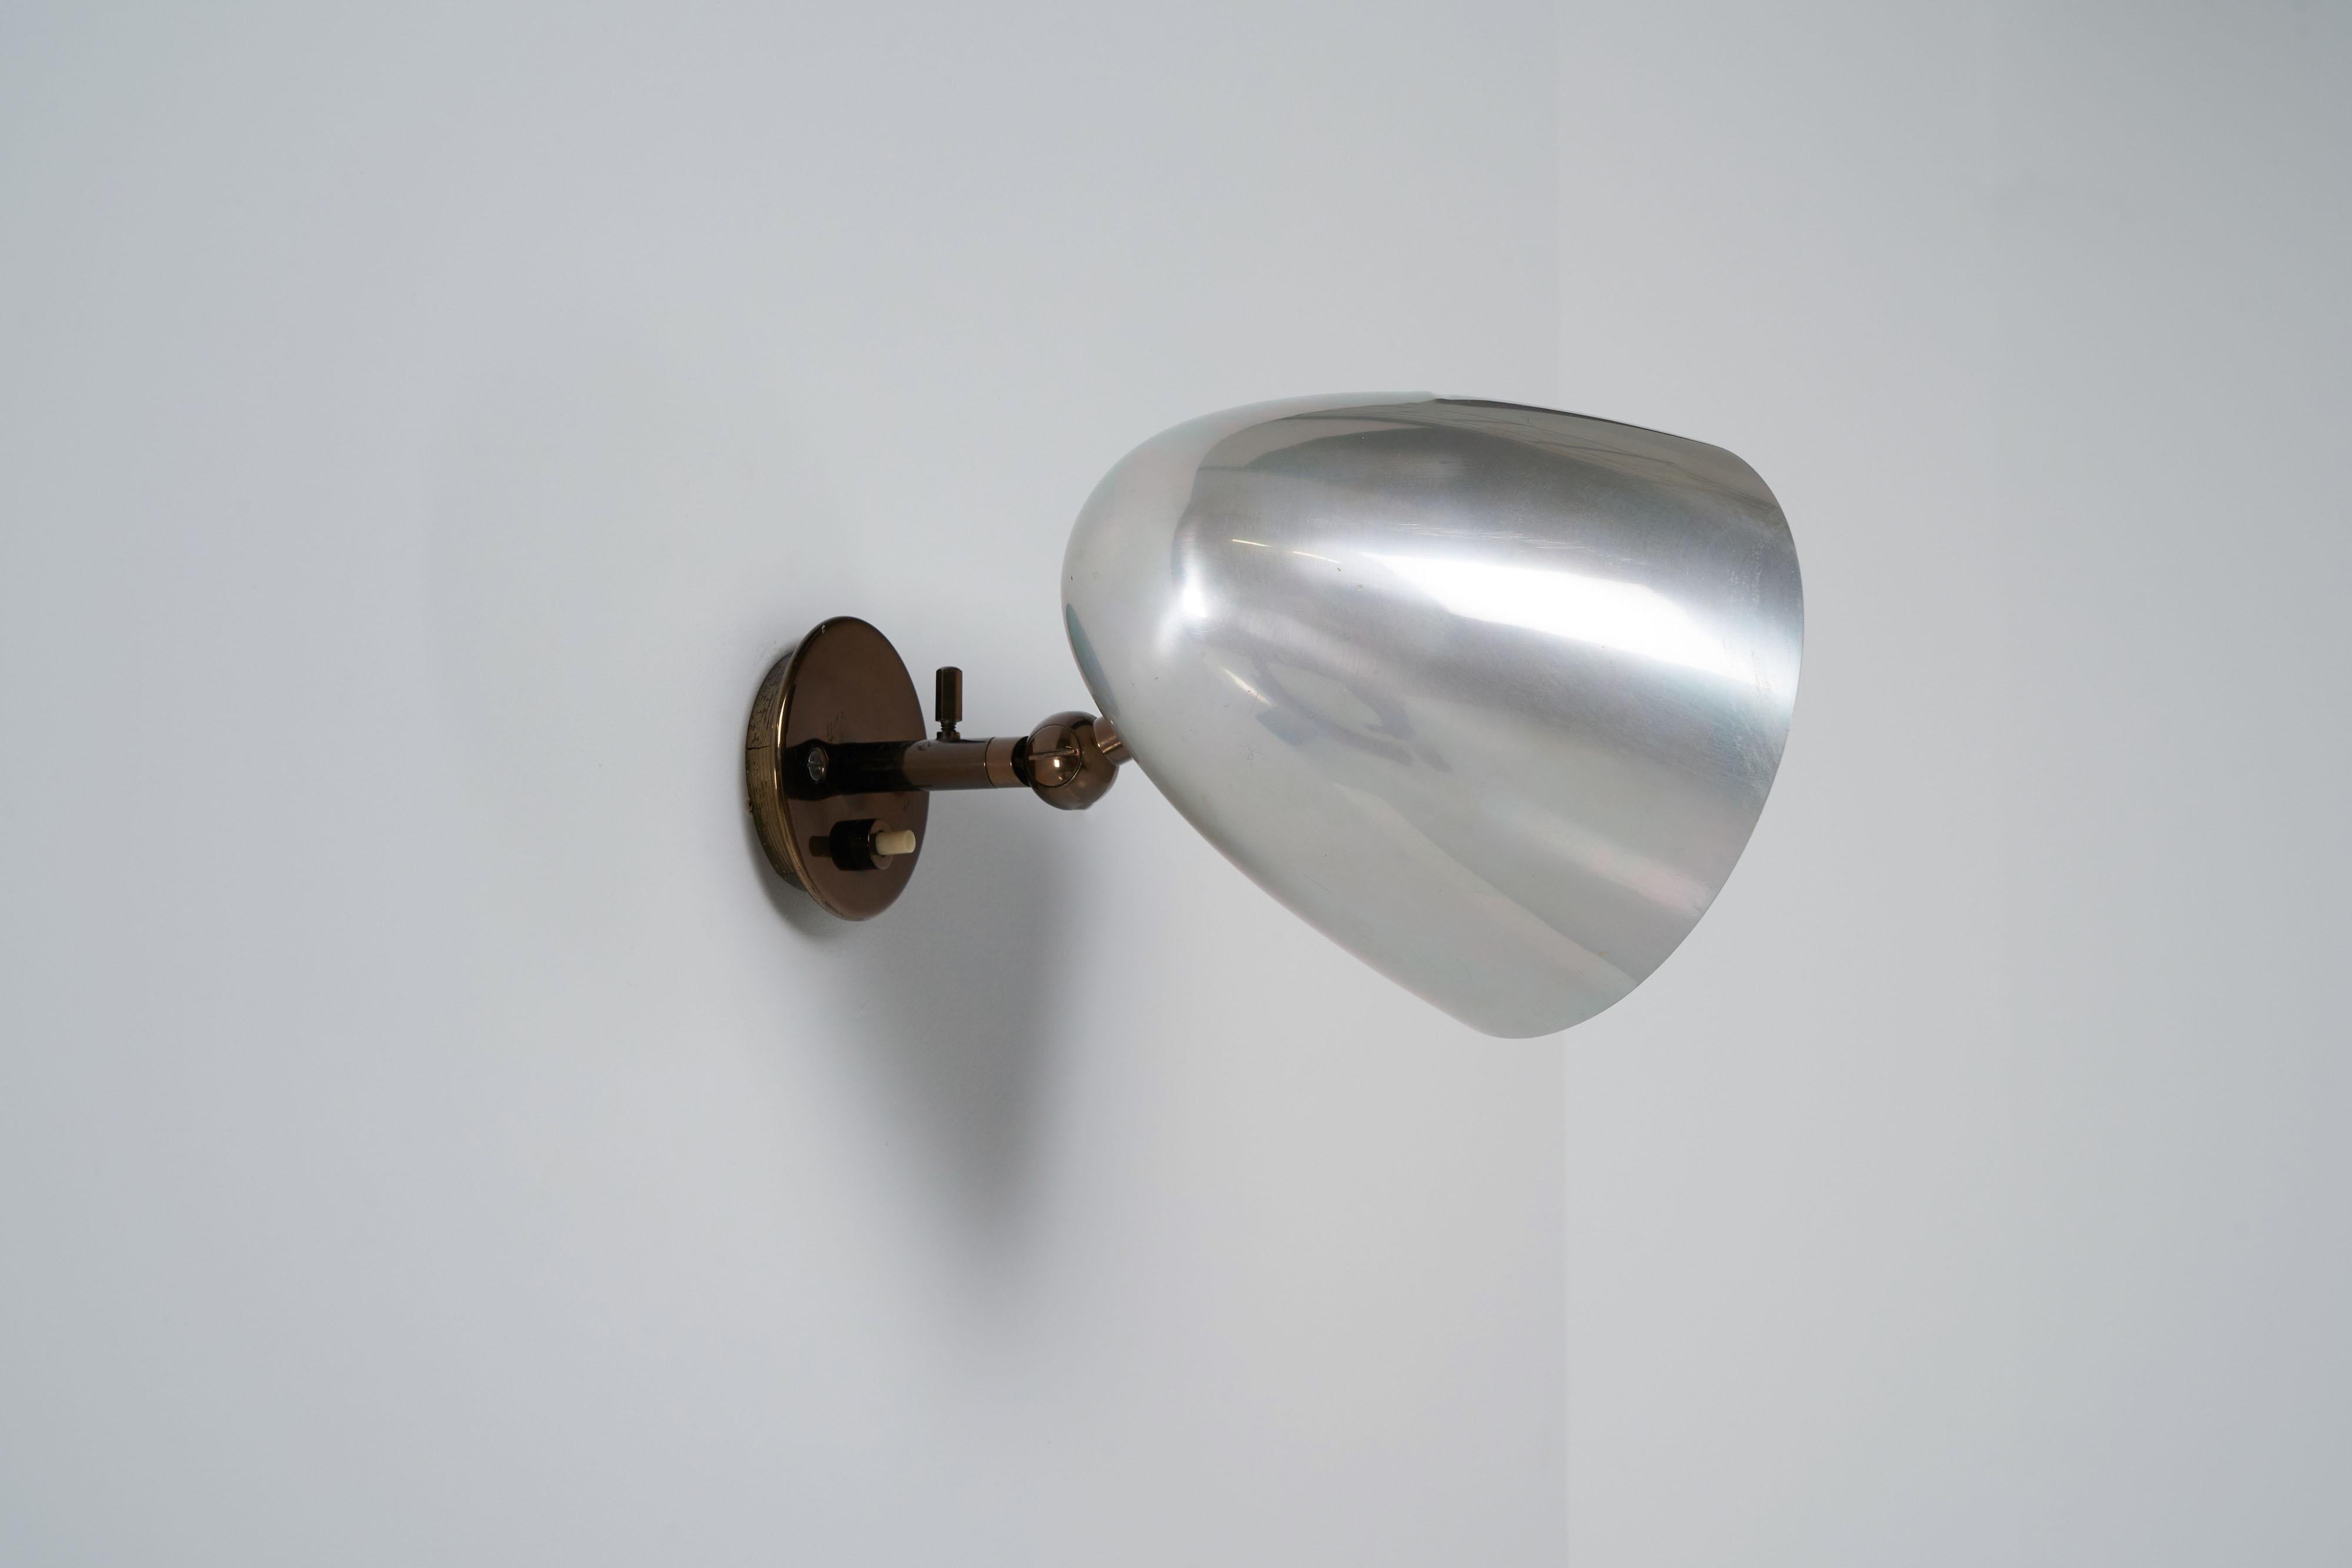 Minimalistic model 27 sconce designed by Gino Sarfatti and manufactured by Arteluce, Italy 1956. This minimalistic sconce was designed by one of the greatest light designers from the mid-20th century. This sconce has a very nice elliptical shaped